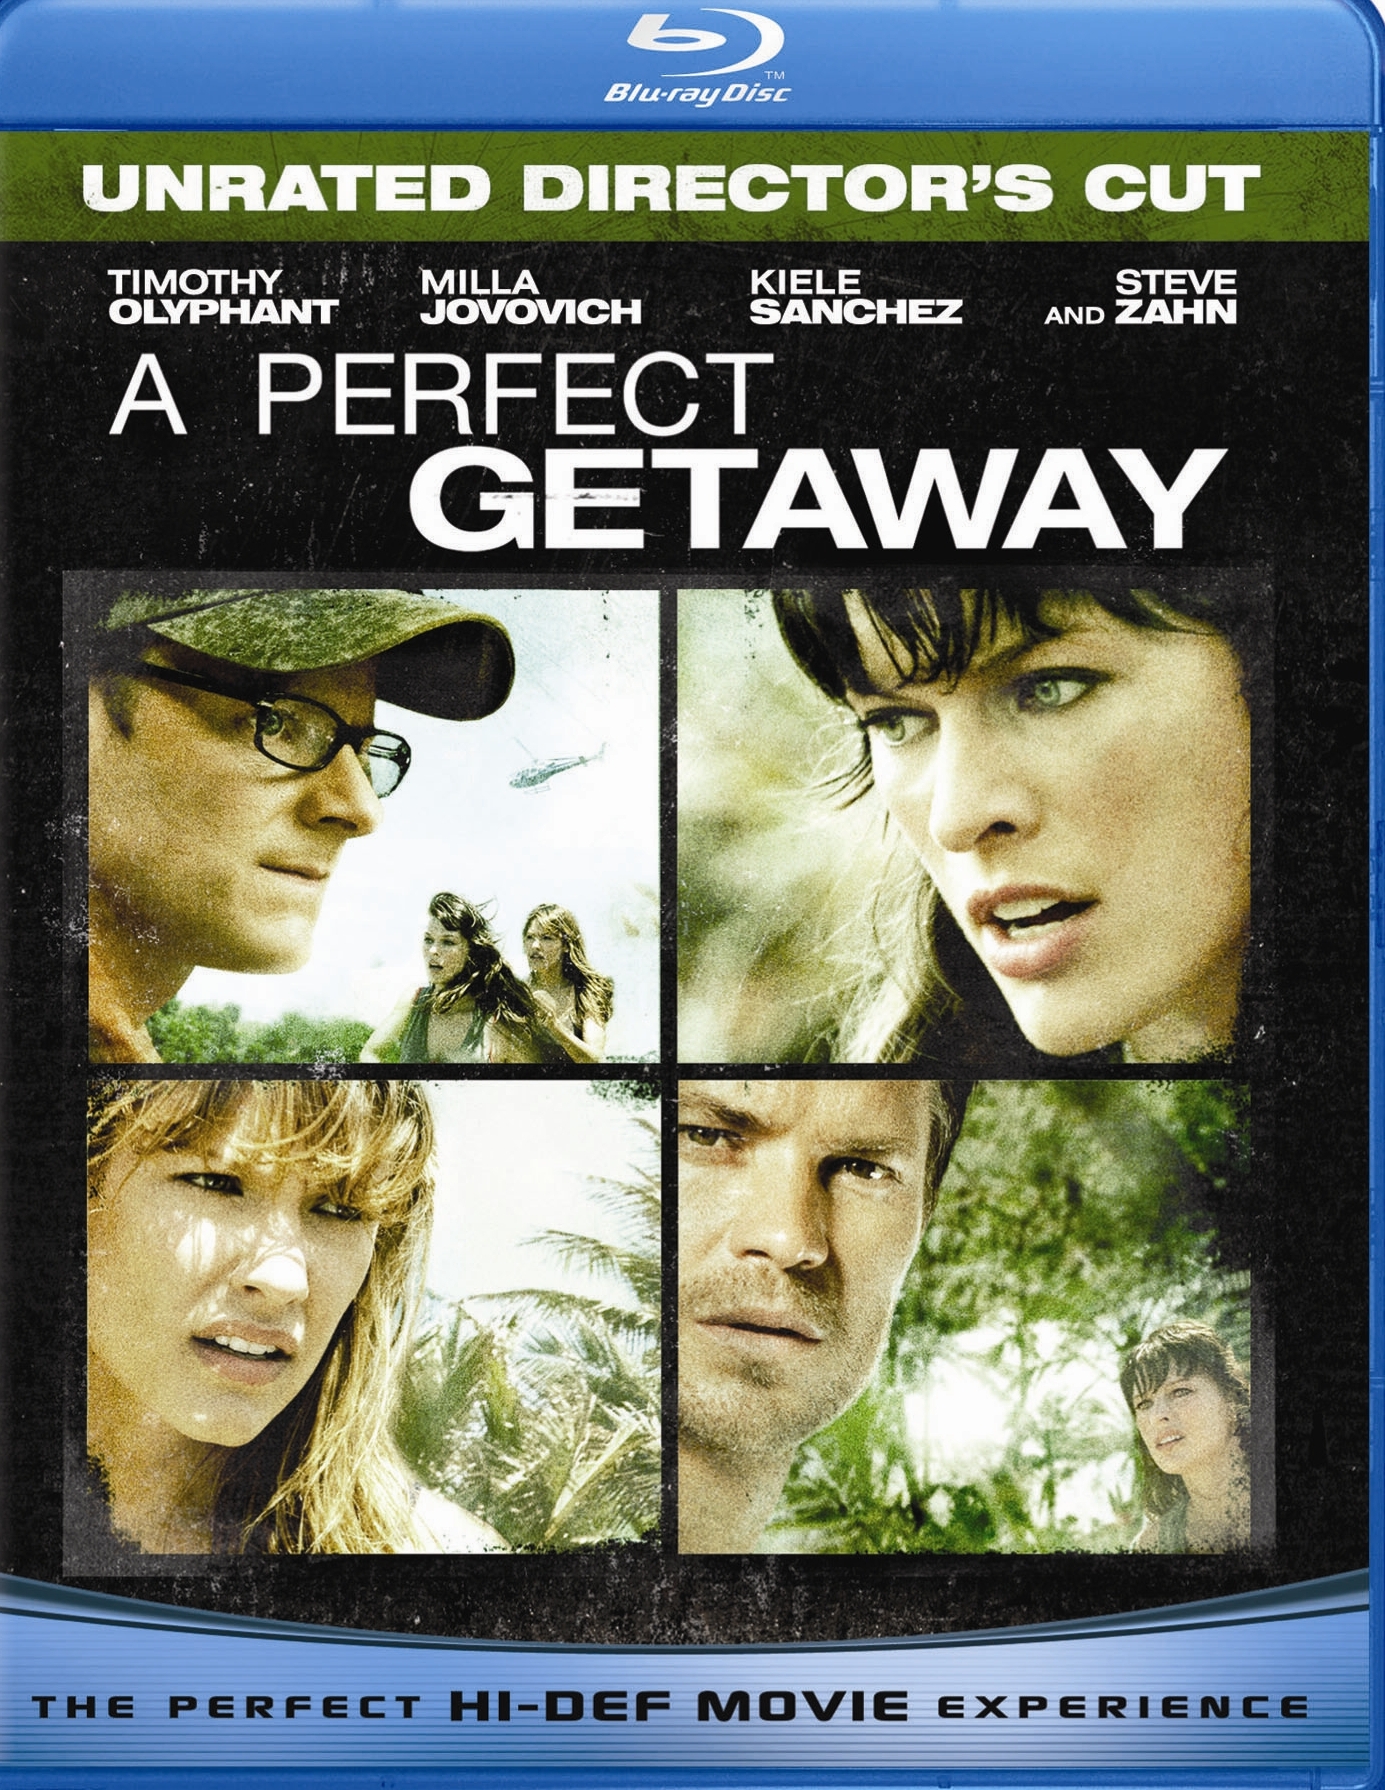 A Perfect Getaway Unratedrated Versions Blu-ray 2009 - Best Buy